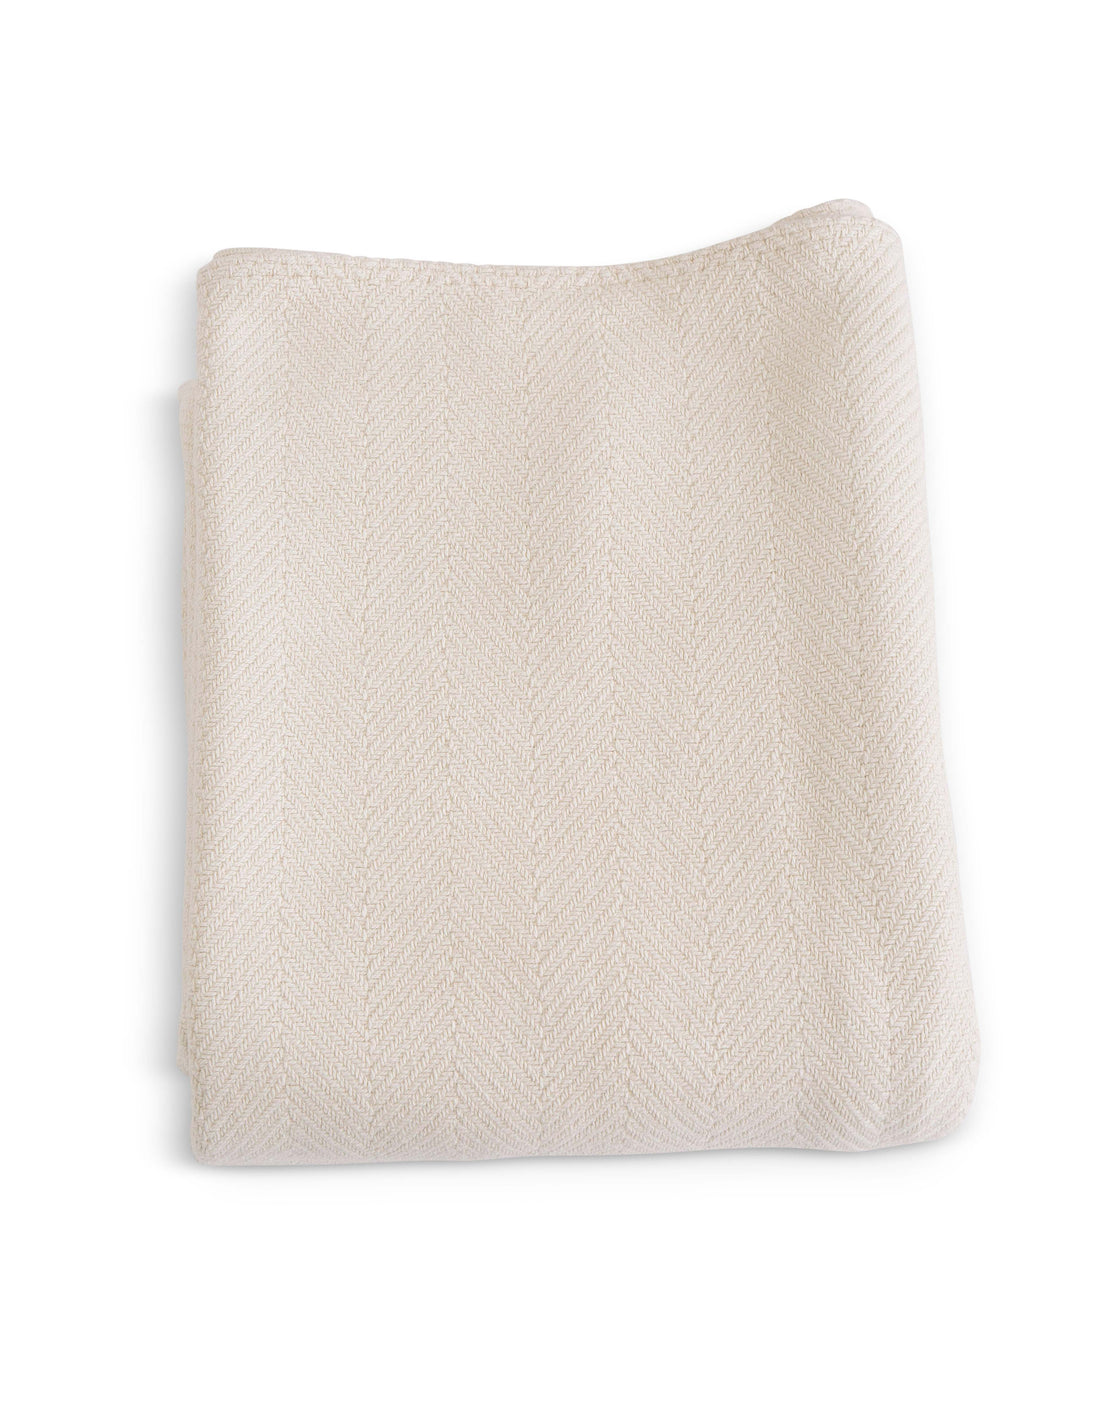 Evangeline's Natural colored 100% cotton herringbone woven blanket, folded. Sizes twin, full/queen, and king. The breathable quality of cotton with the weight and warmth of a wool blanket. 